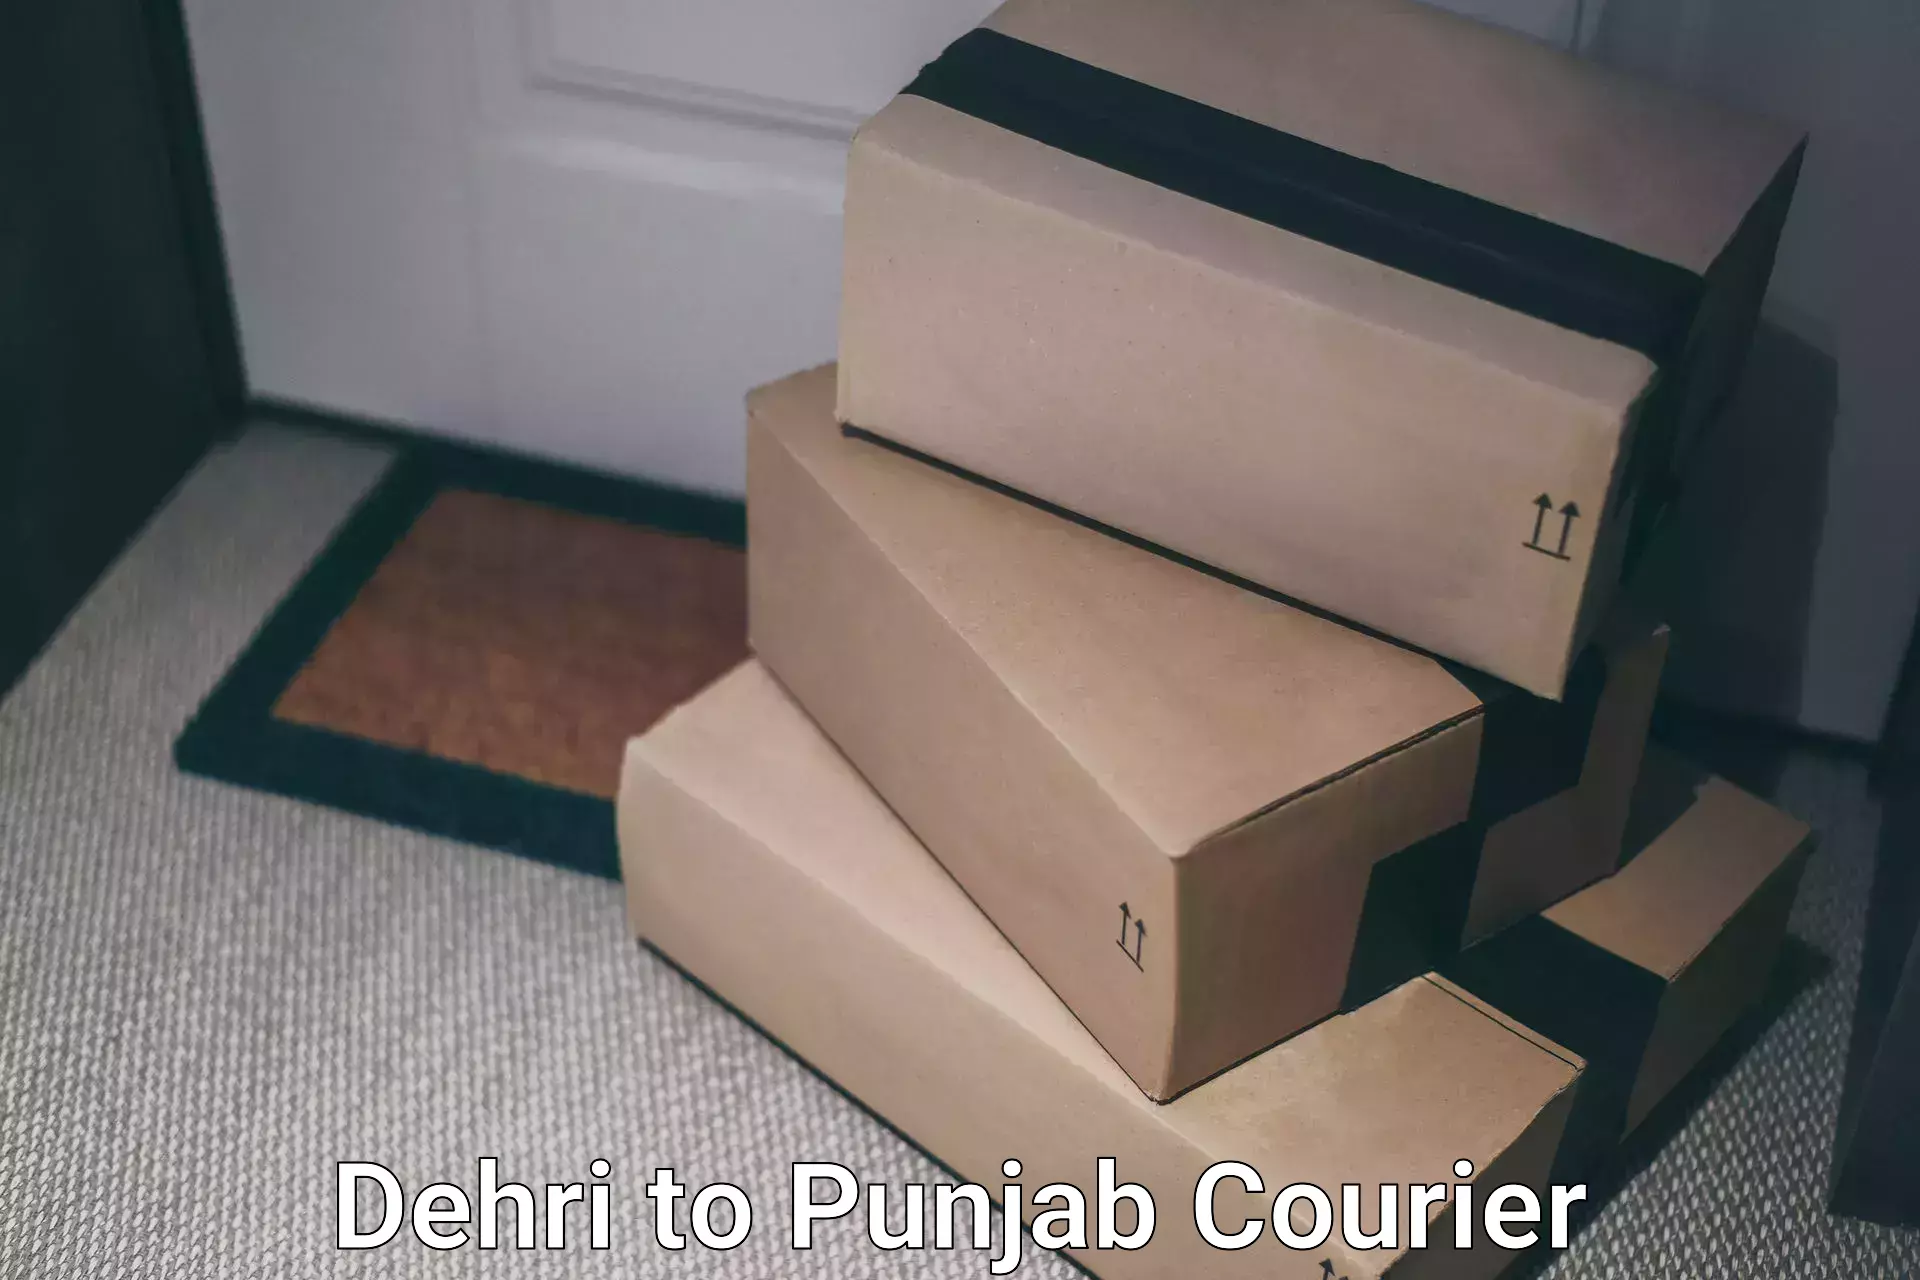 Next-day delivery options in Dehri to Firozpur